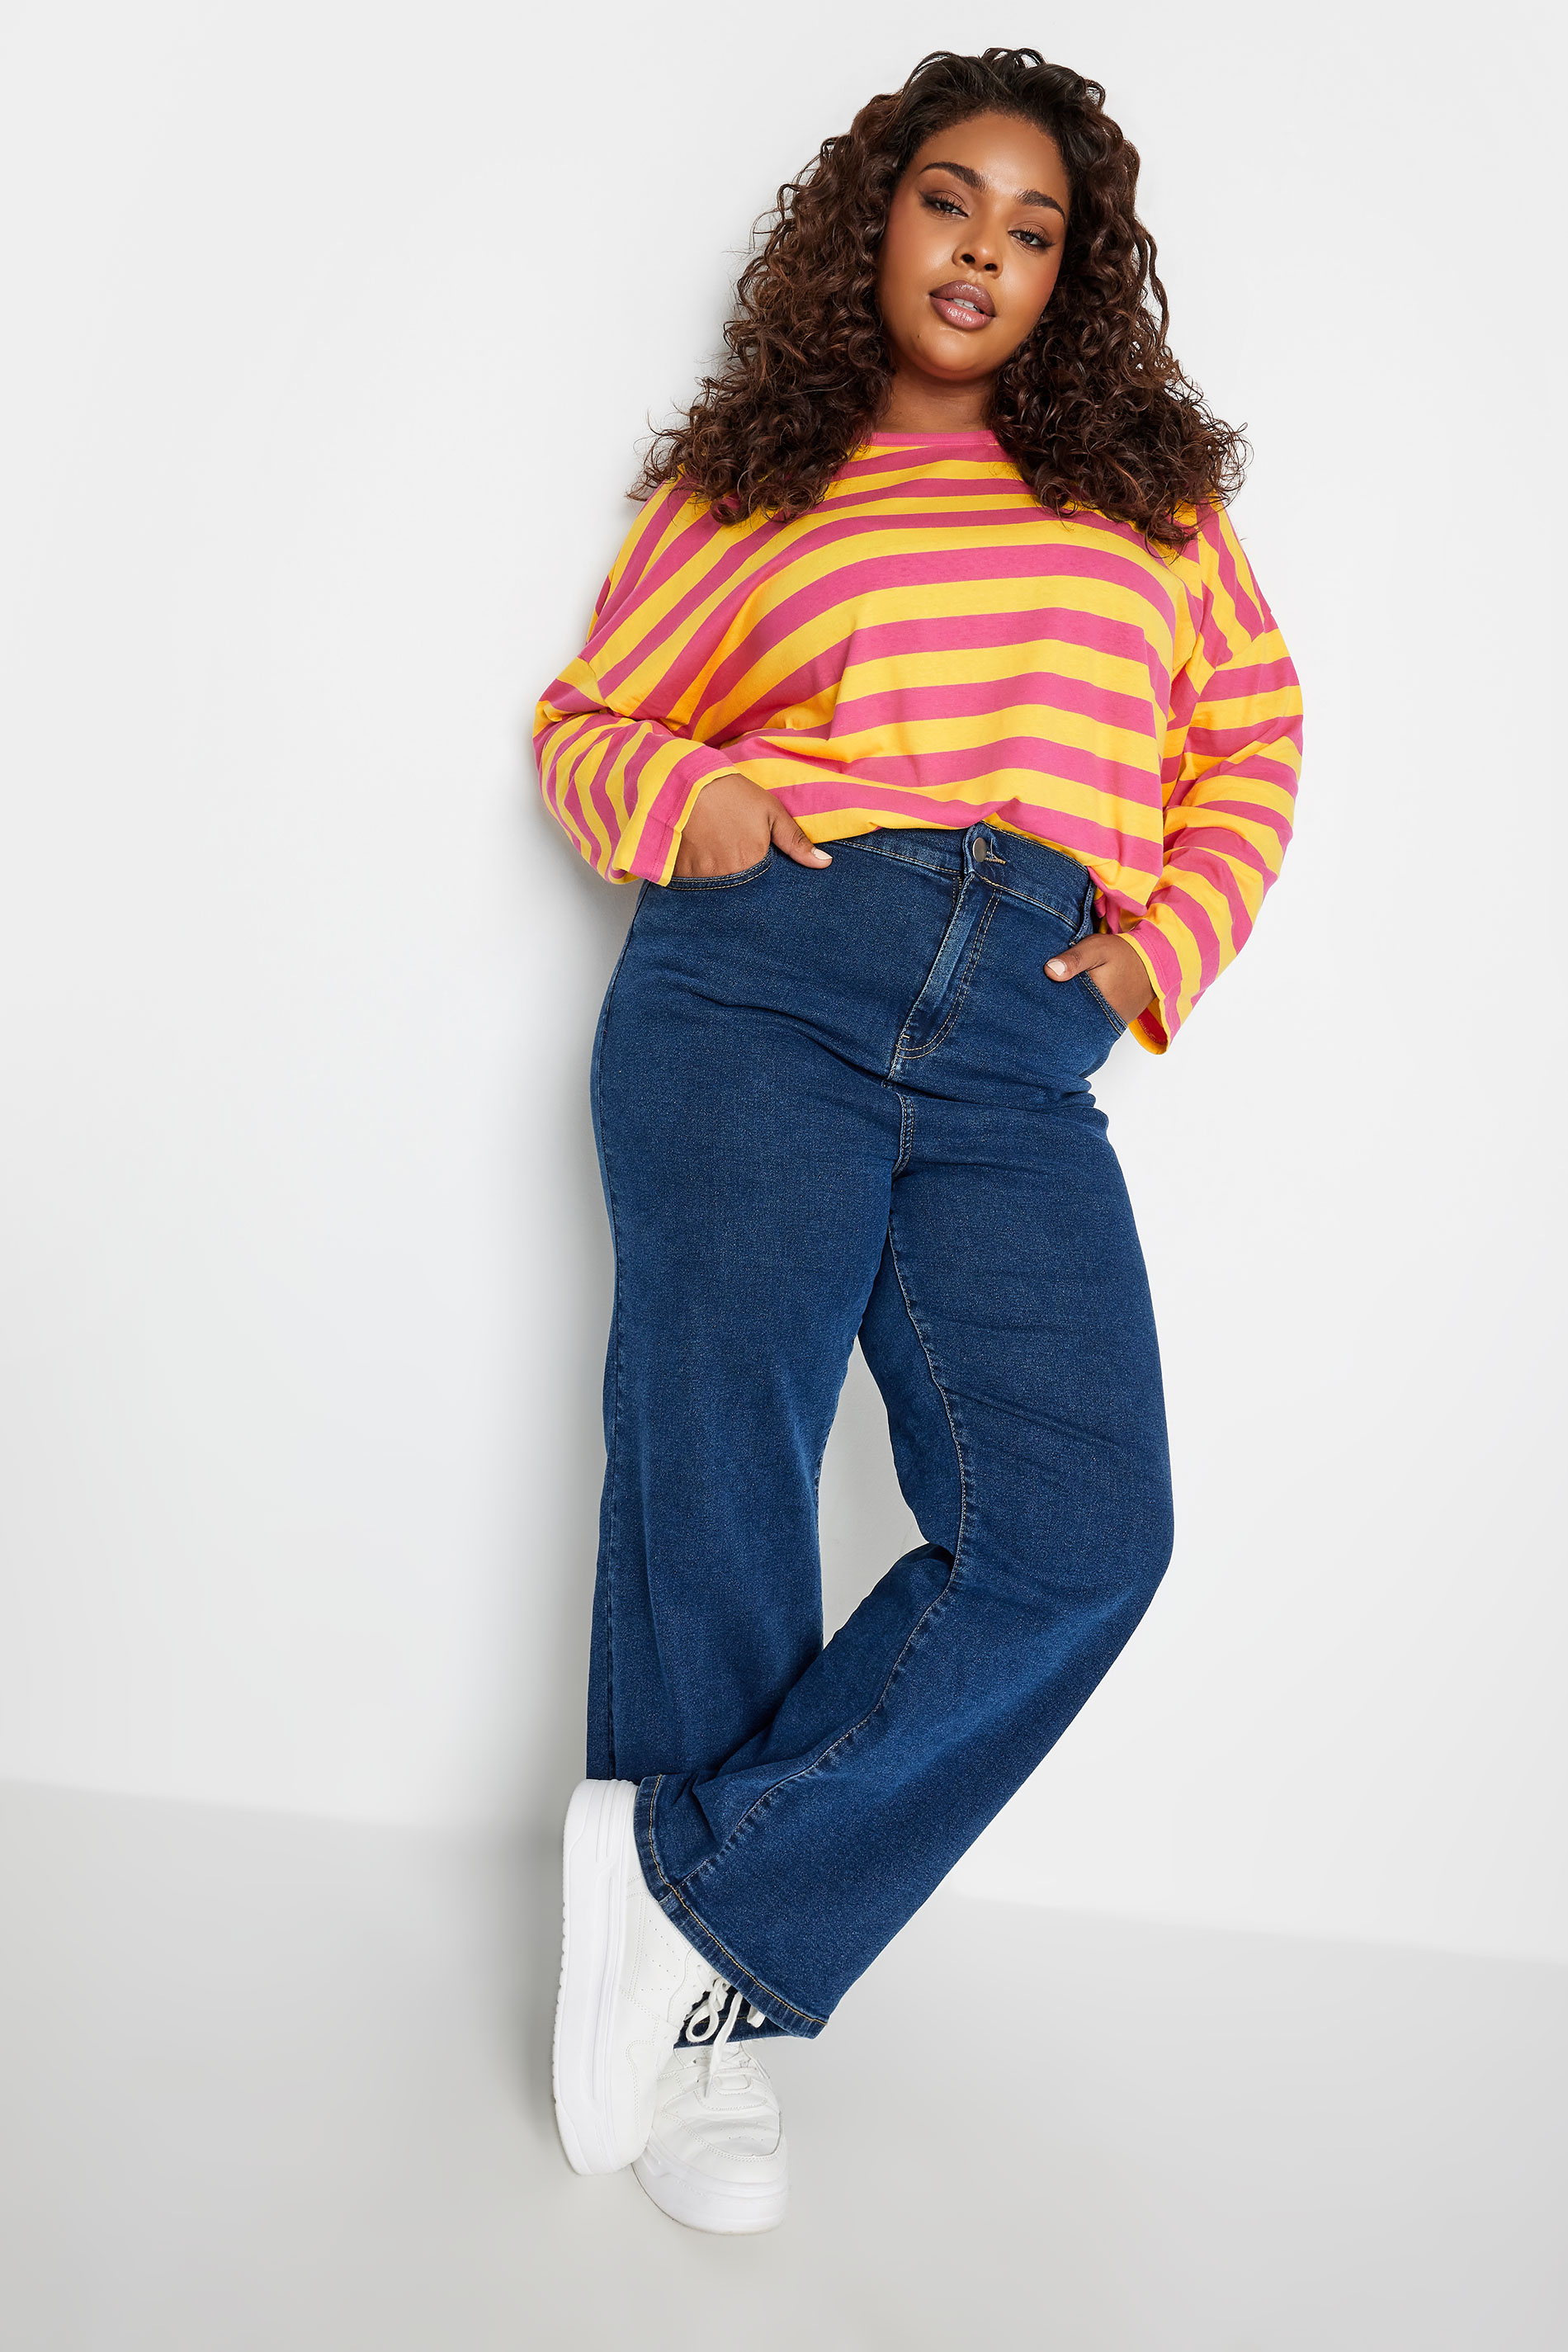 LIMITED COLLECTION Plus Size Pink & Yellow Stripe Top | Yours Clothing 3